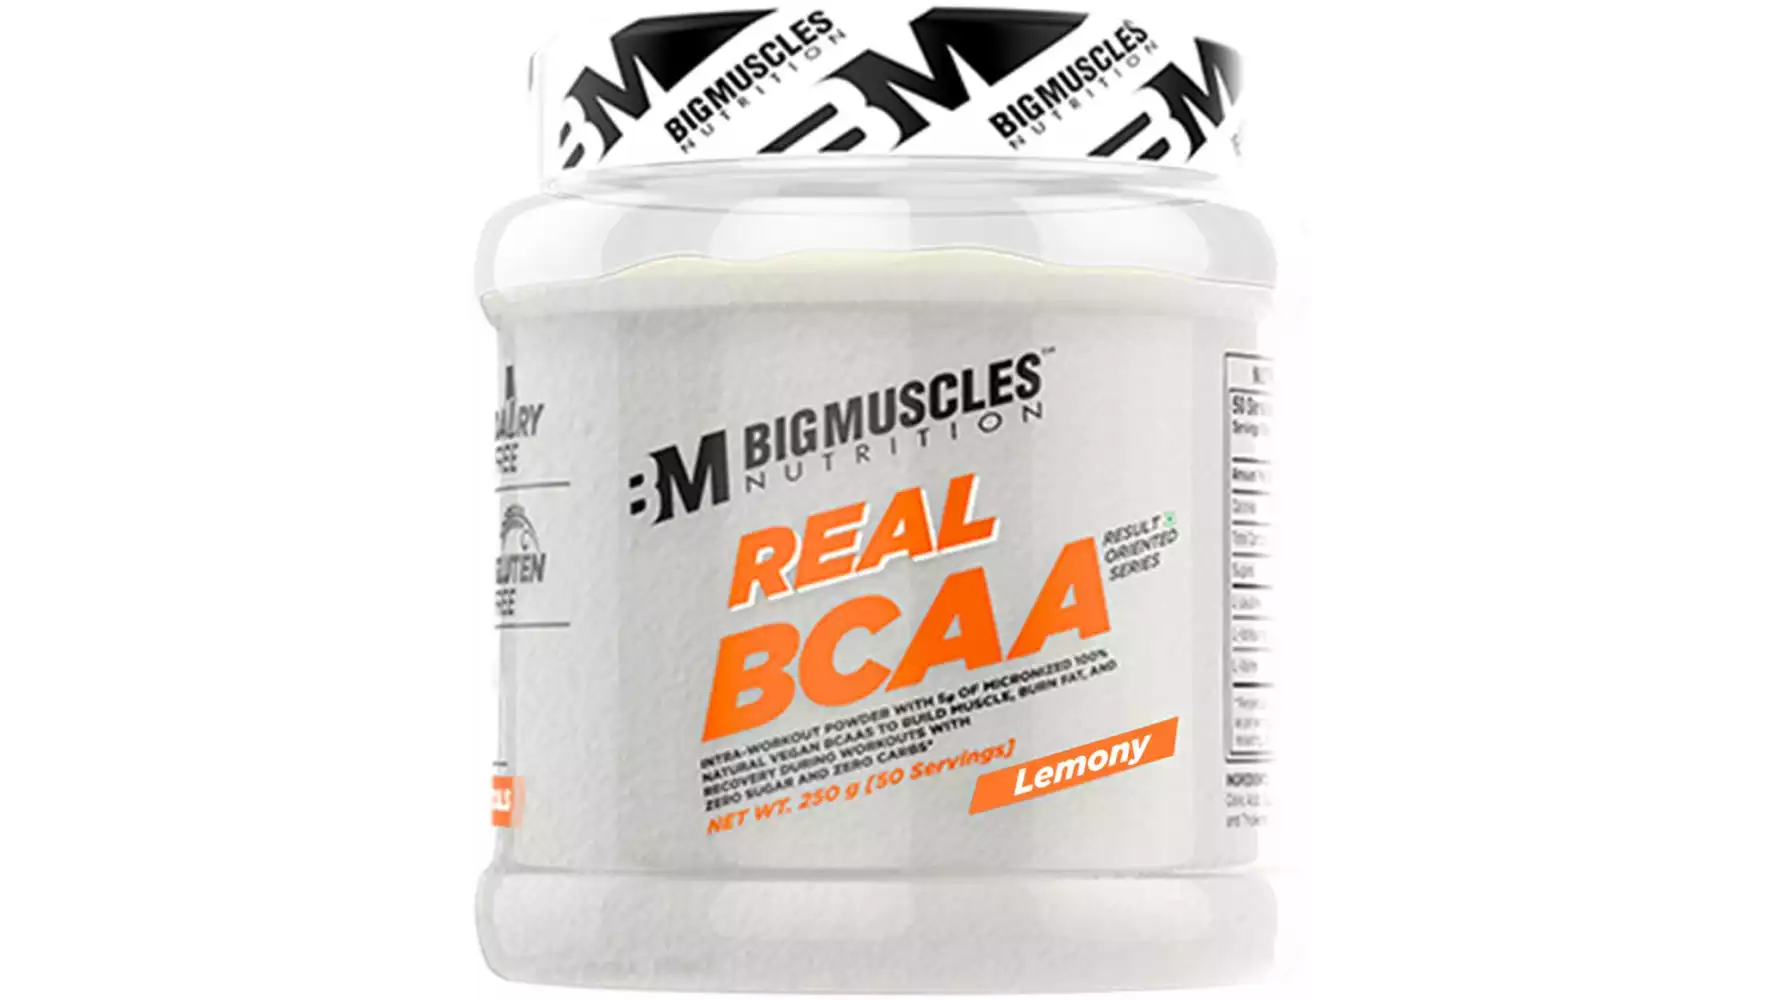 Bigmuscles Nutrition Real Bcaa 100% Micronized Vegan Muscle Recovery & Endurance Powder Lemon (250g)